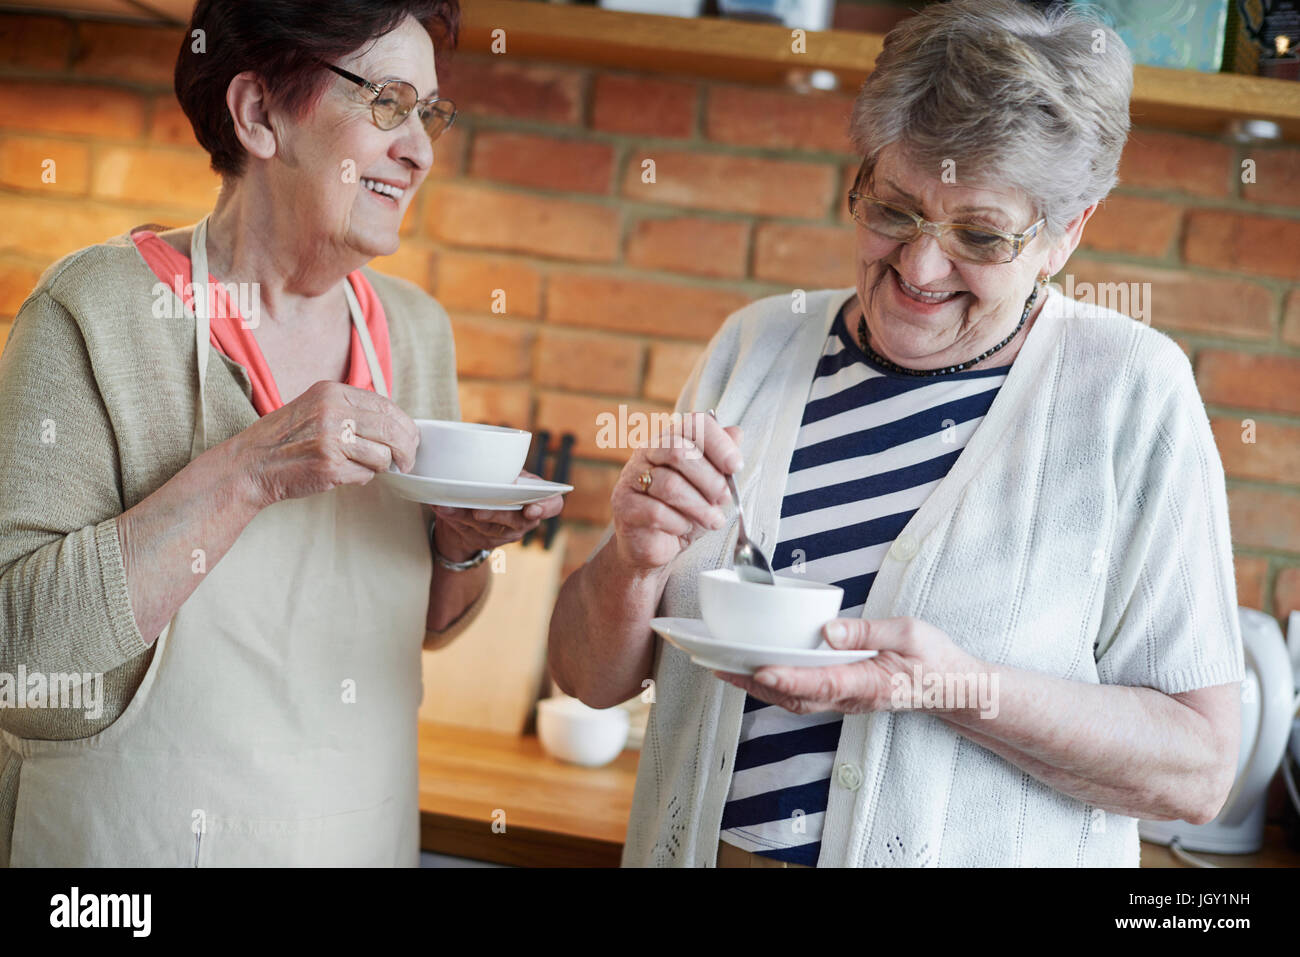 Senior adult women drinking coffee together Stock Photo